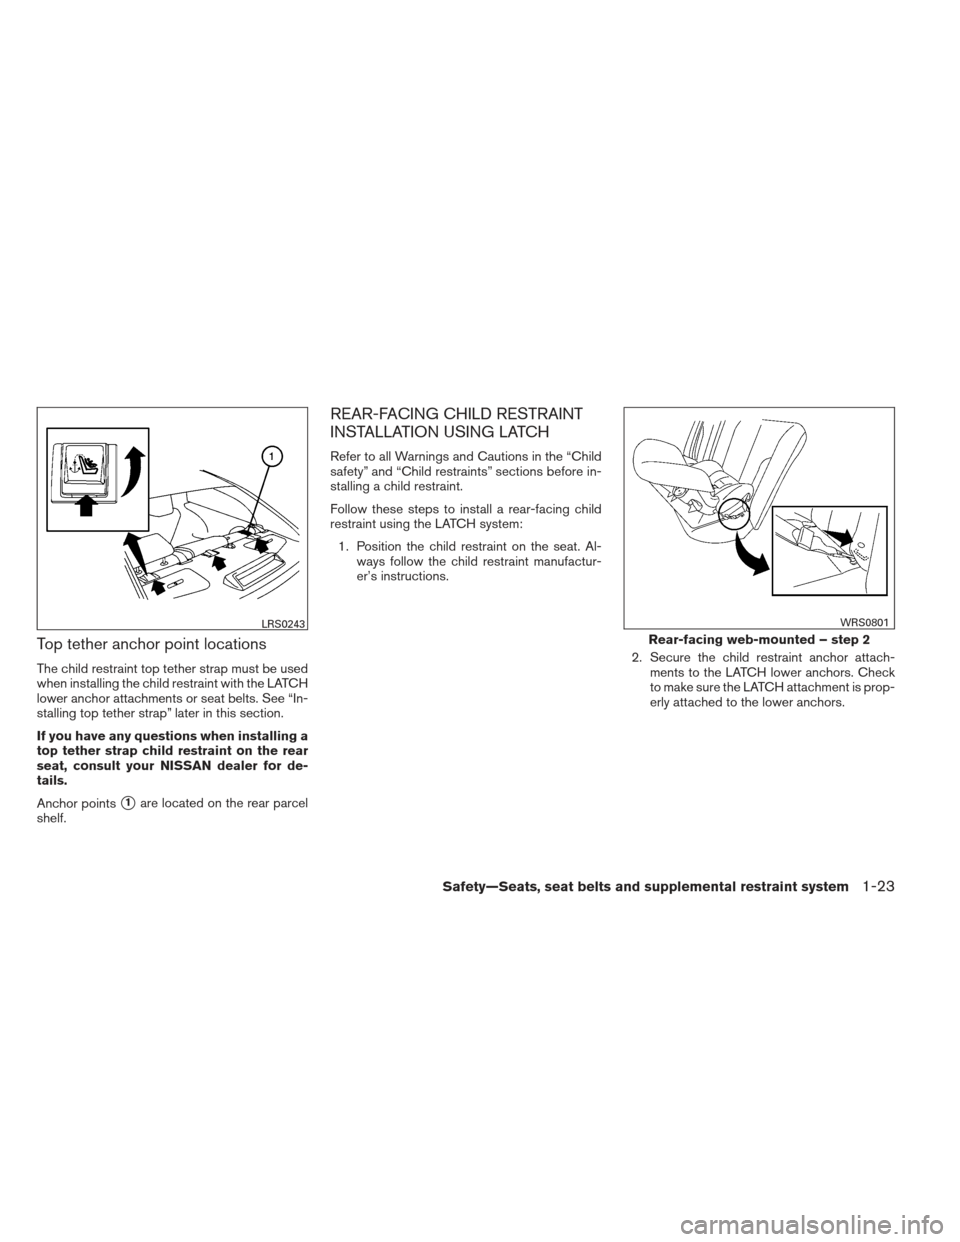 NISSAN MAXIMA 2012 A35 / 7.G User Guide Top tether anchor point locations
The child restraint top tether strap must be used
when installing the child restraint with the LATCH
lower anchor attachments or seat belts. See “In-
stalling top t